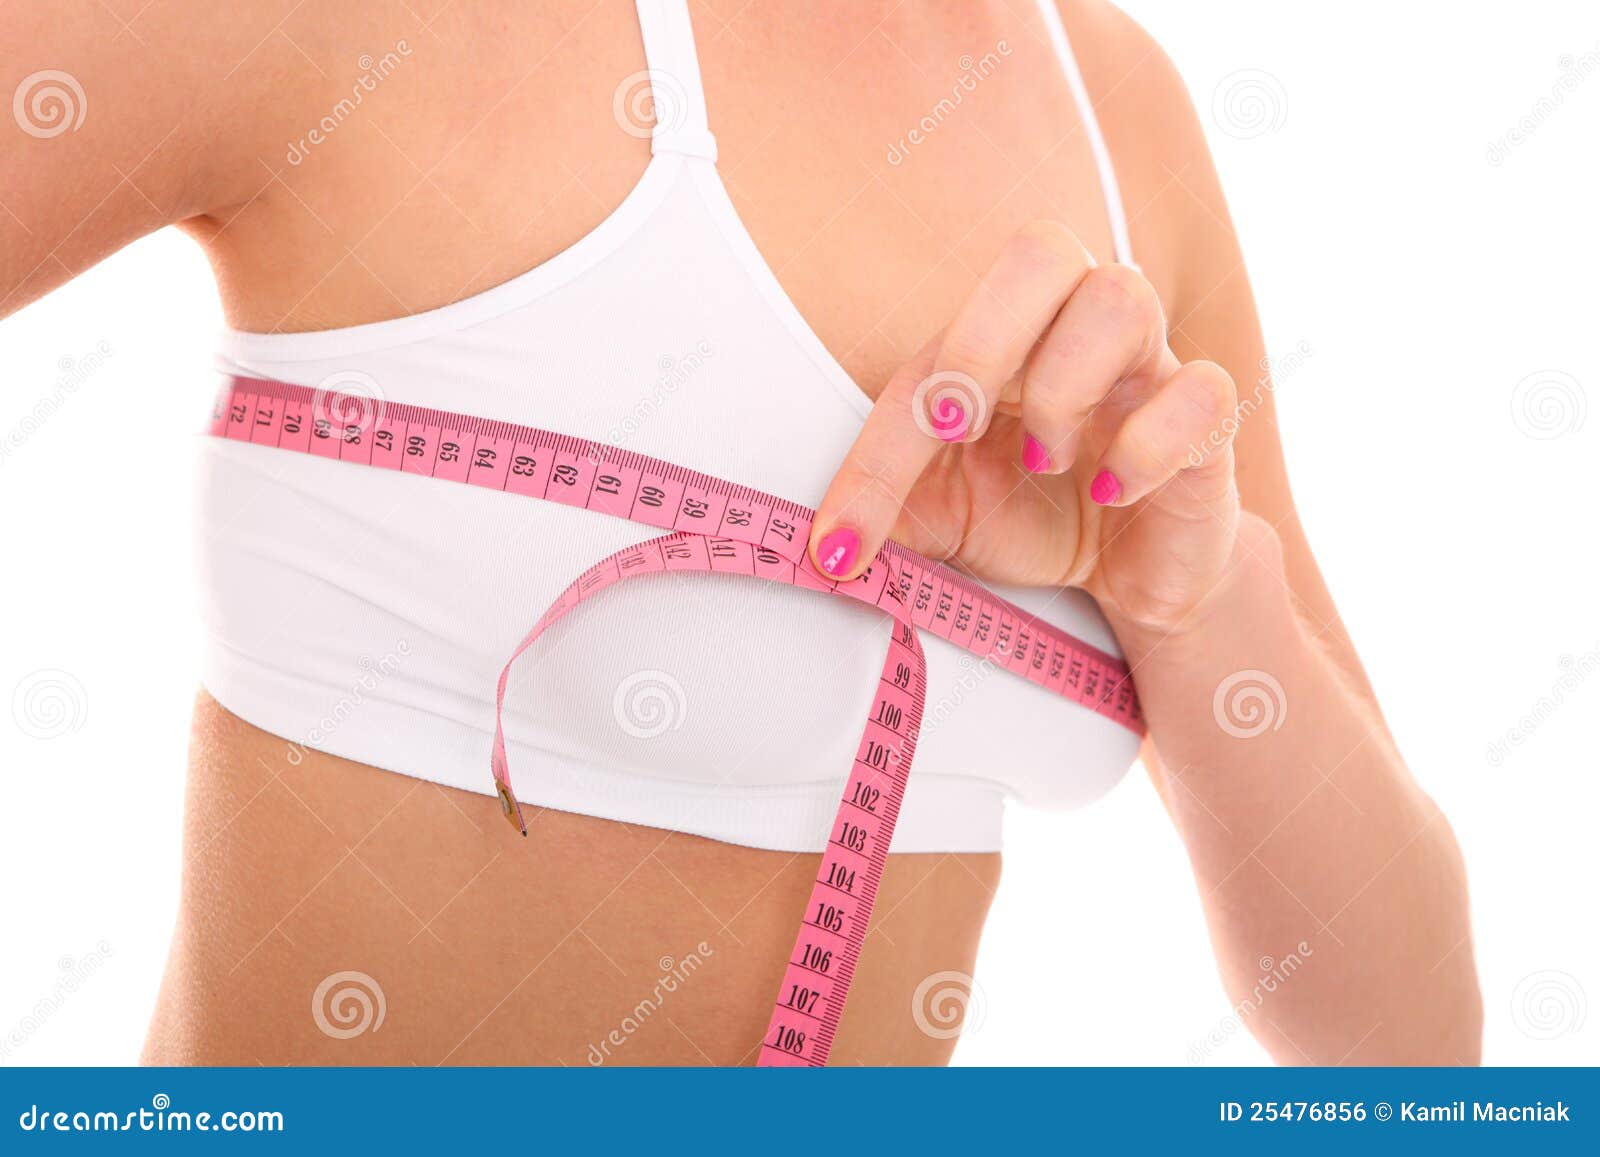 Woman Measuring Her Bra Size with Tape Measure Stock Image - Image of  attractive, tape: 66398121